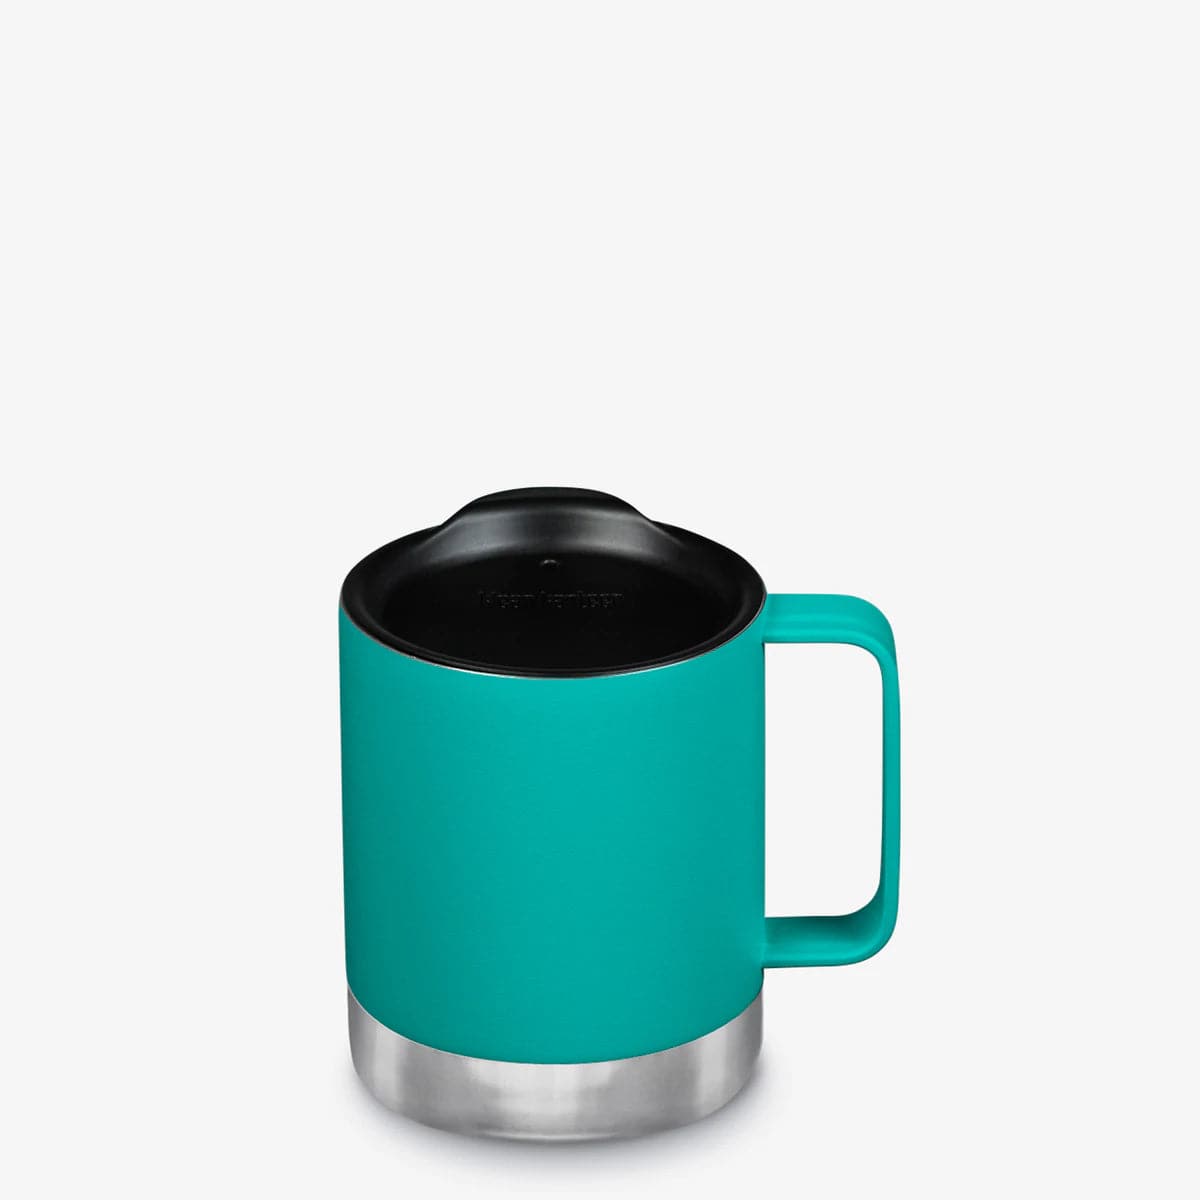 Featuring the Camp Mug - 12oz camp cup, coffee cup, coffee mug, gift for kayaker, gift for paddle boader, gift for rafter, gifts for her, gifts for him, kitchen manufactured by Klean Kanteen shown here from a fourth angle.